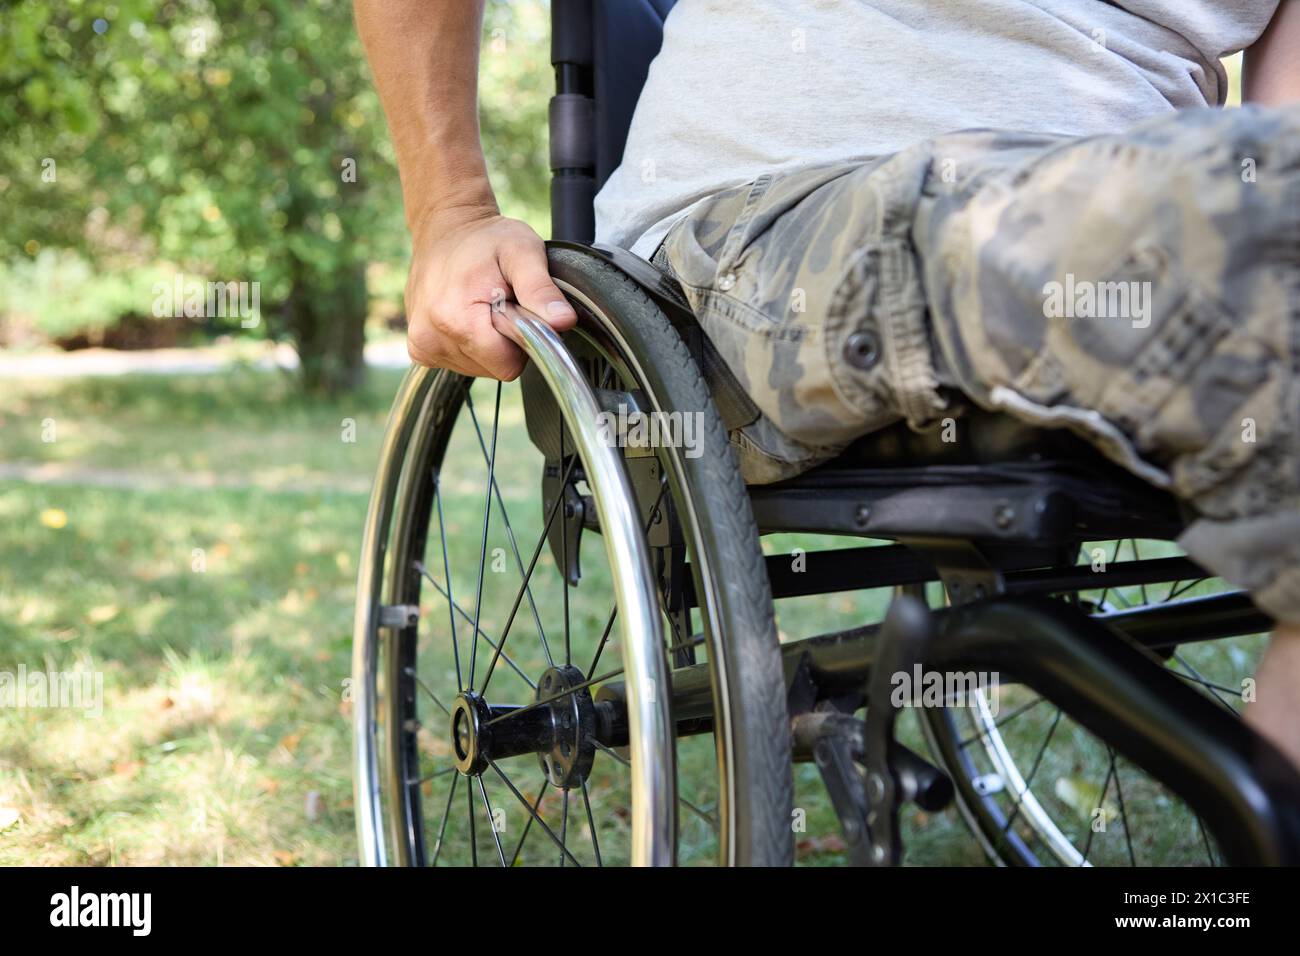 A person who uses a wheelchair is captured outdoors, focusing on independent mobility and enjoying nature in a tranquil park setting. Stock Photo